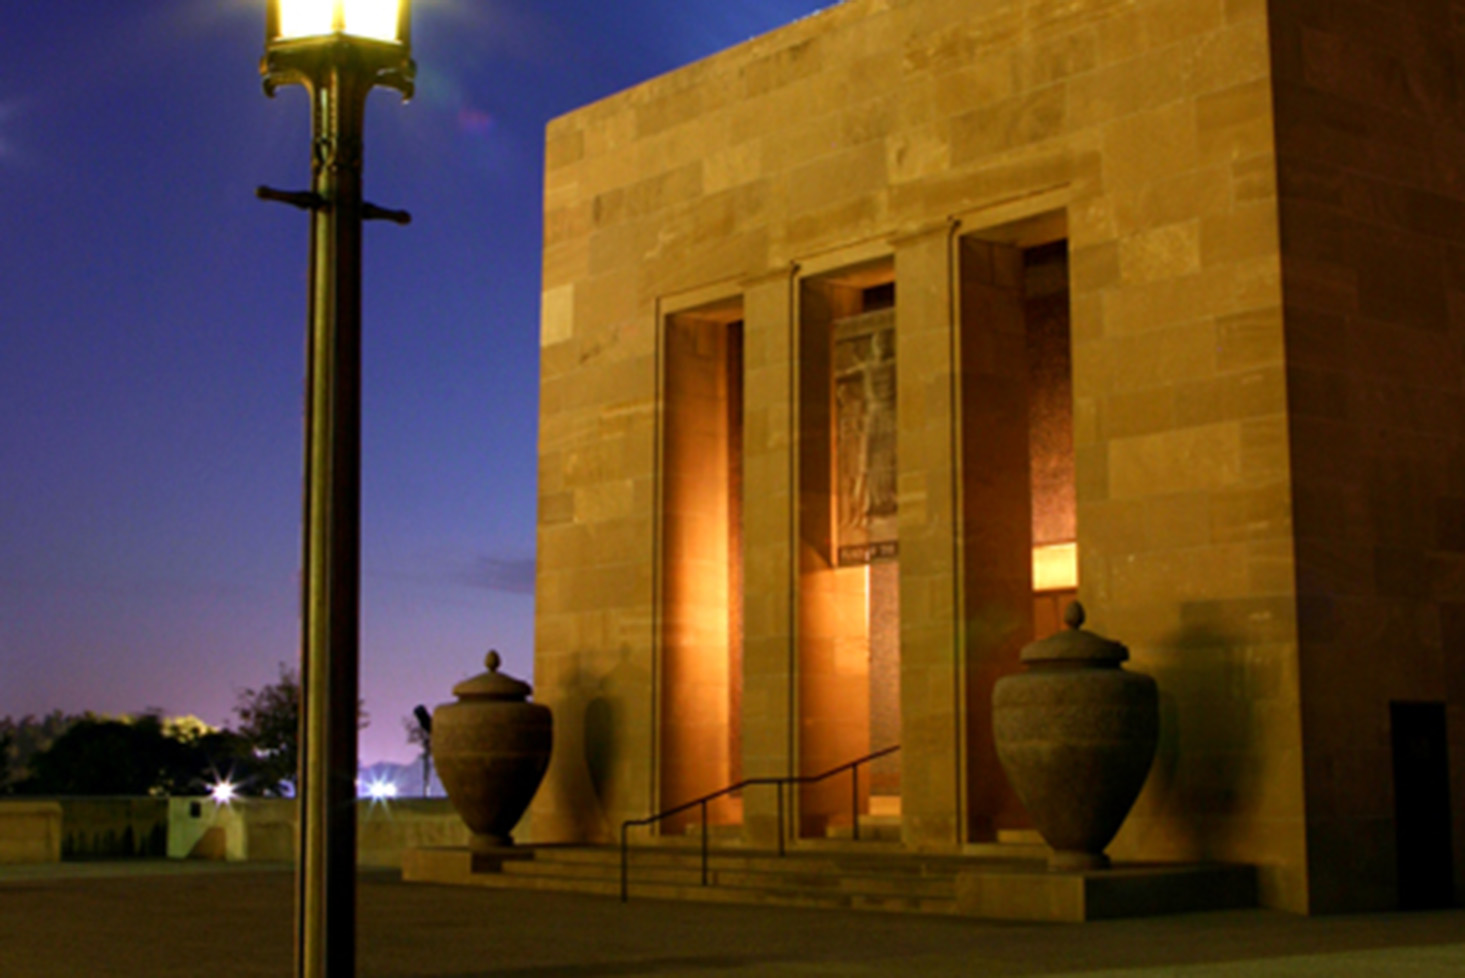 Exterior view of Exhibit Hall at night